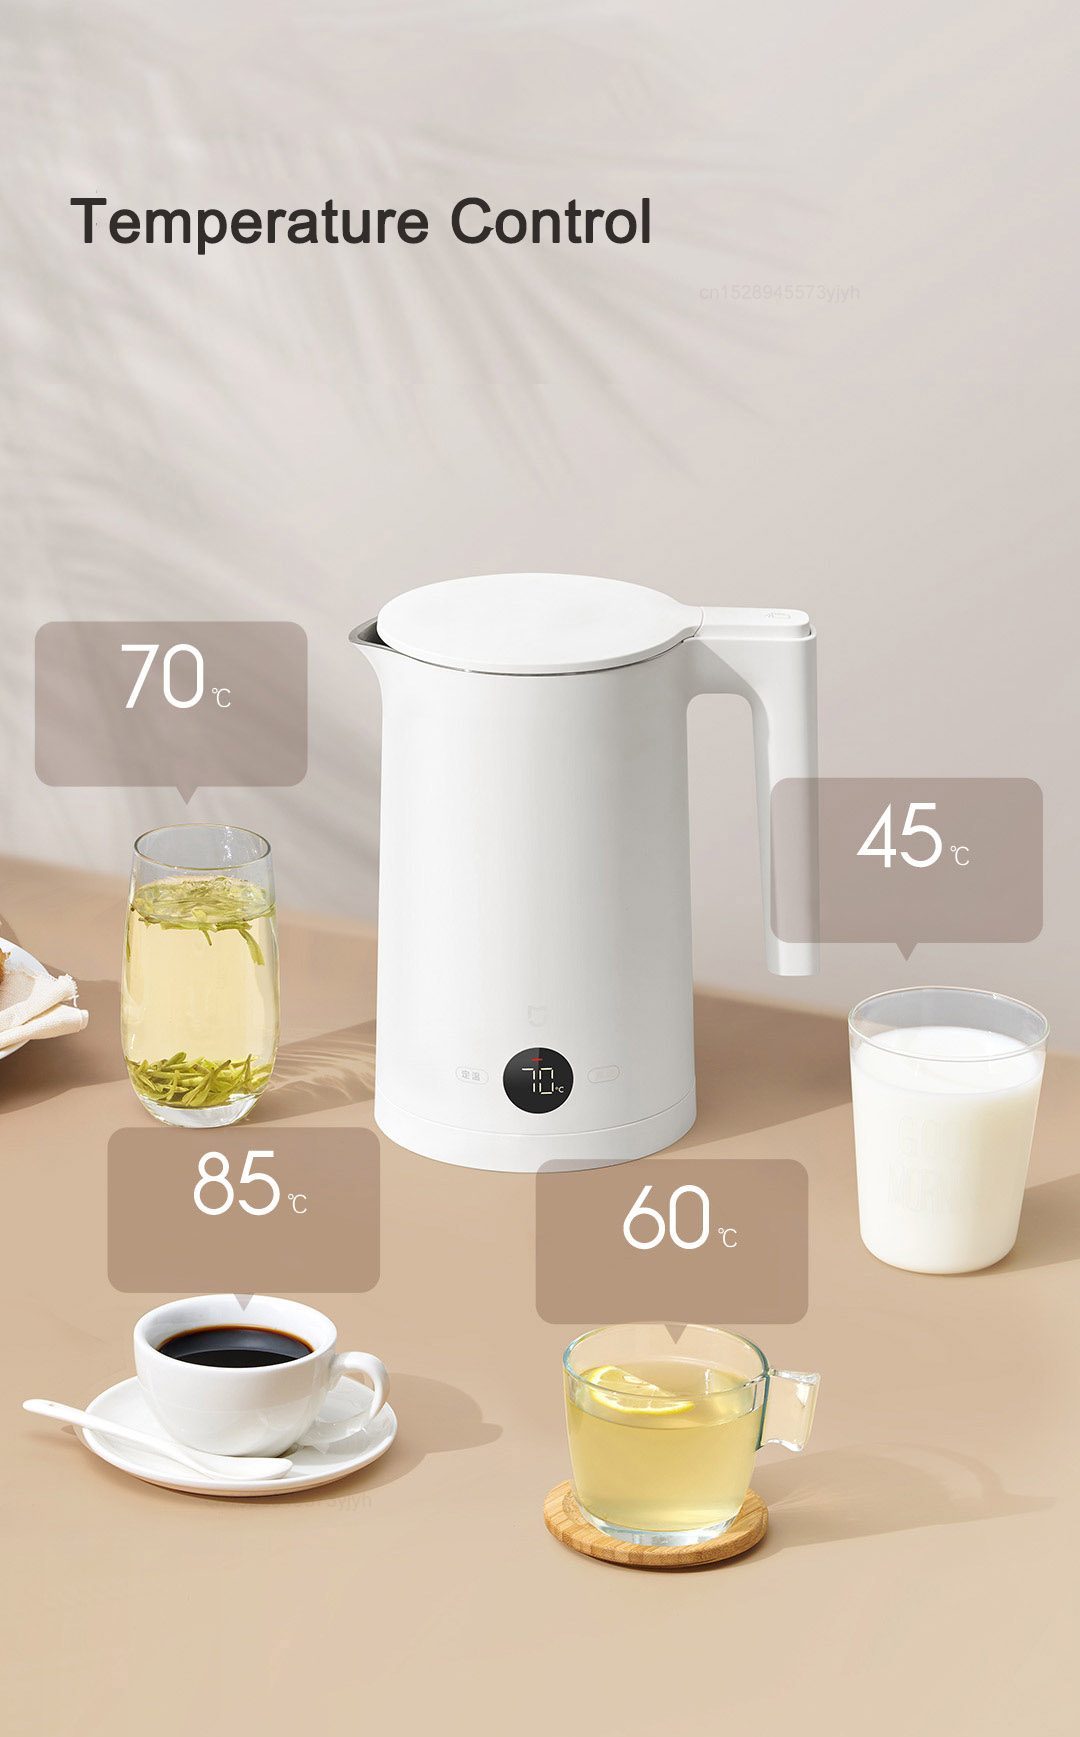 Xiaomi introduced MiJia Thermostatic Electric Kettle 2: a kettle with  temperature control and 1800W power for $25